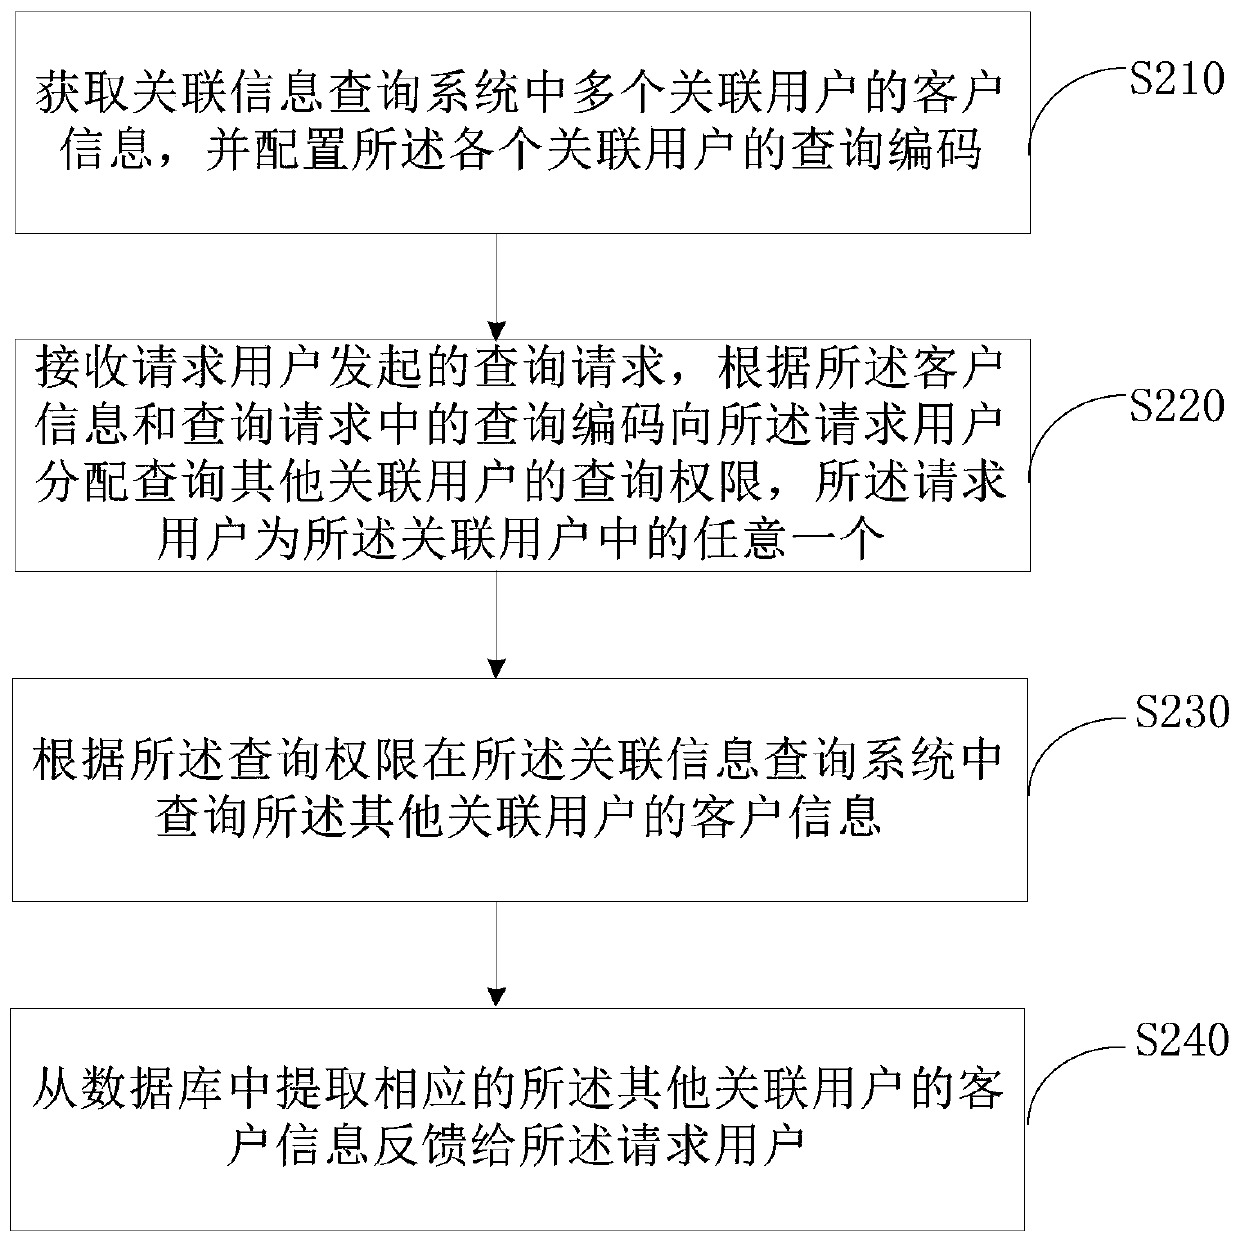 Associated information query method and device